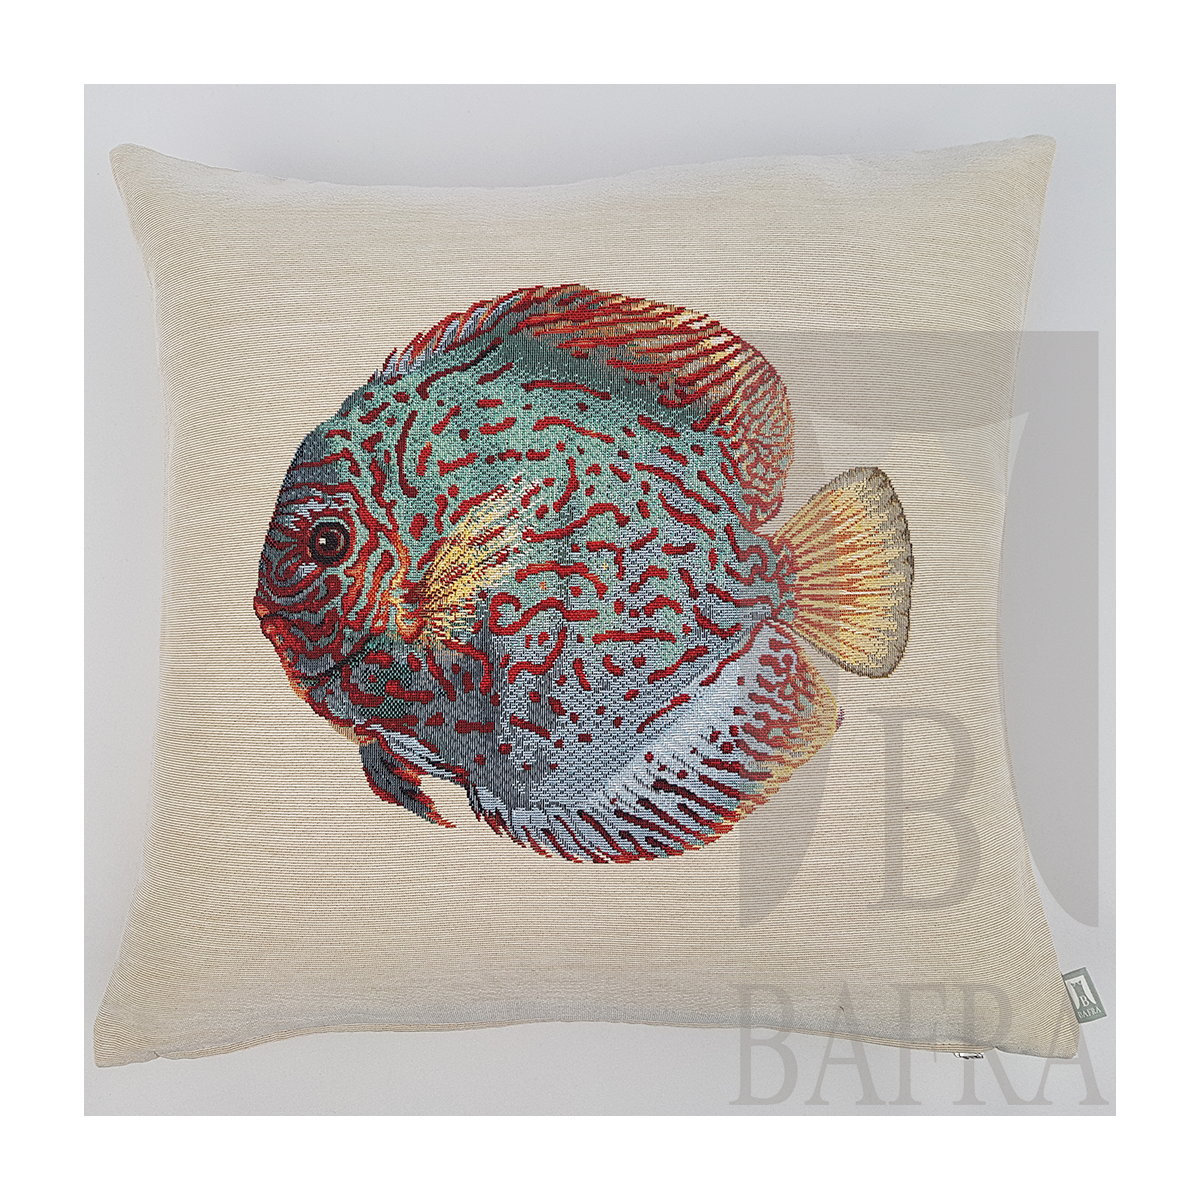 ARRAS PILLOWCASE FISH - DOUBLE SIDED